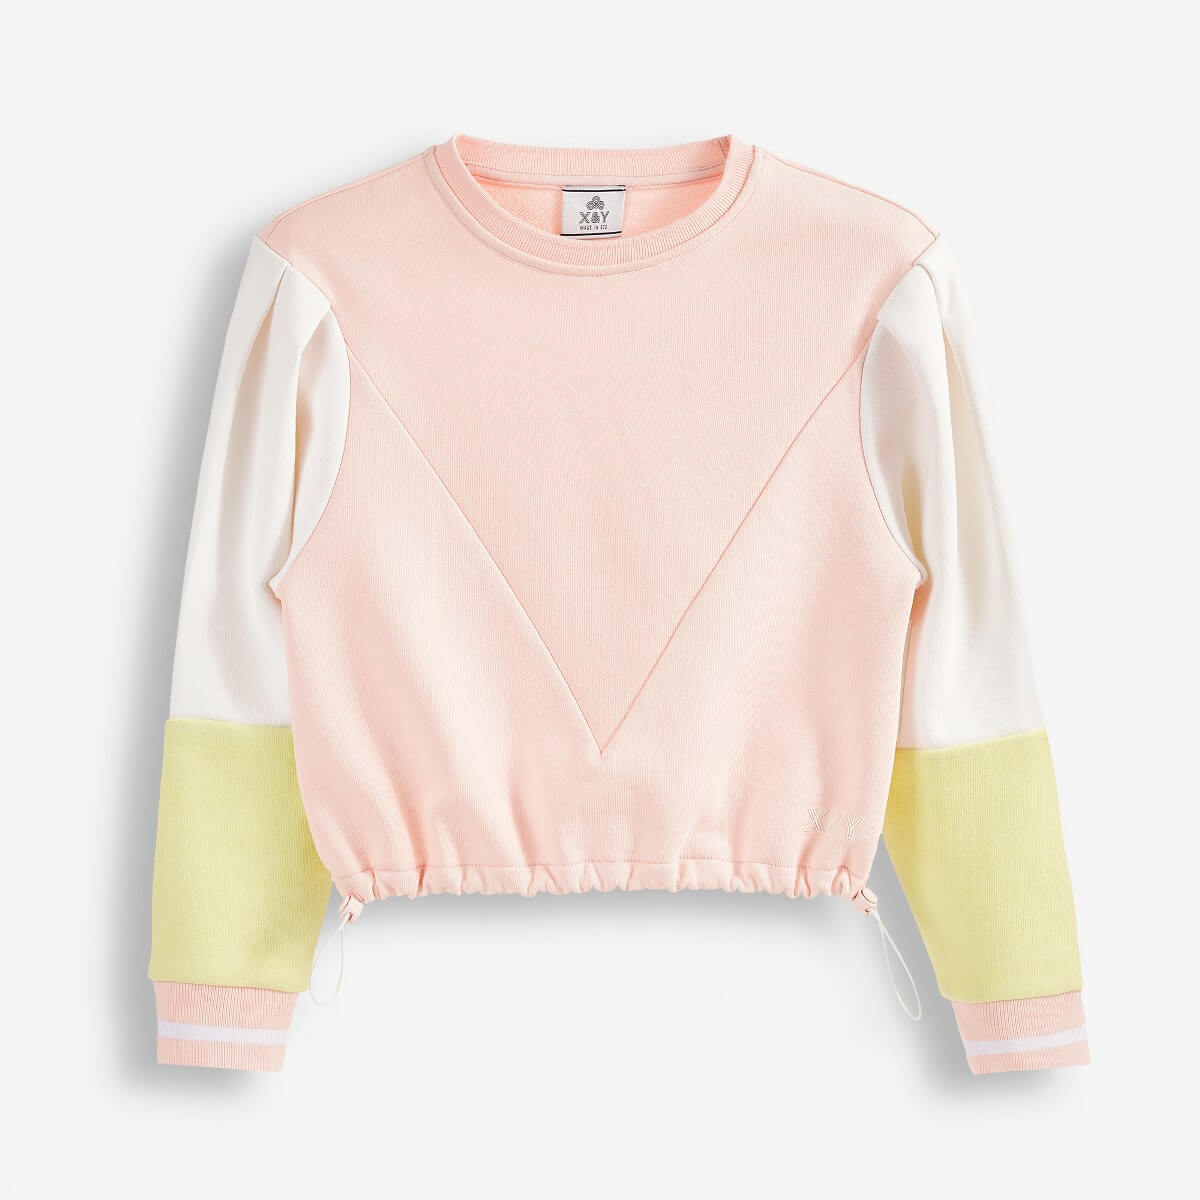 Cropped Girls' Sweatshirt with Puffed Sleeves and Elastic Sleeve Cuffs